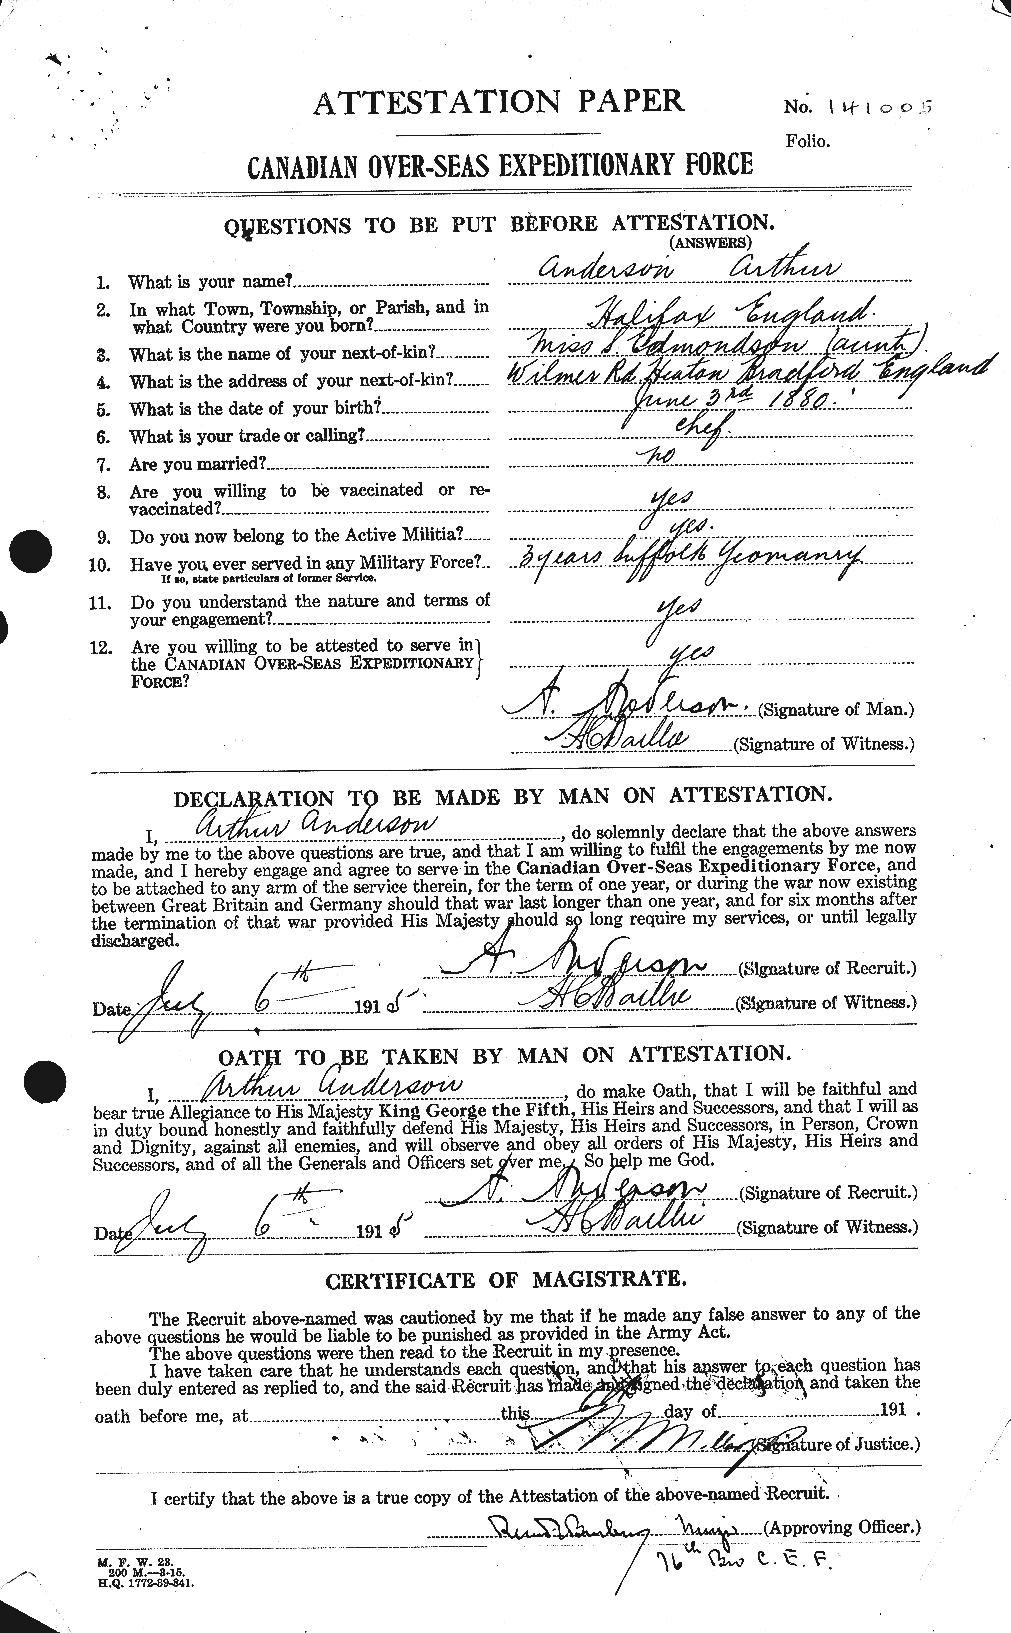 Personnel Records of the First World War - CEF 209372a